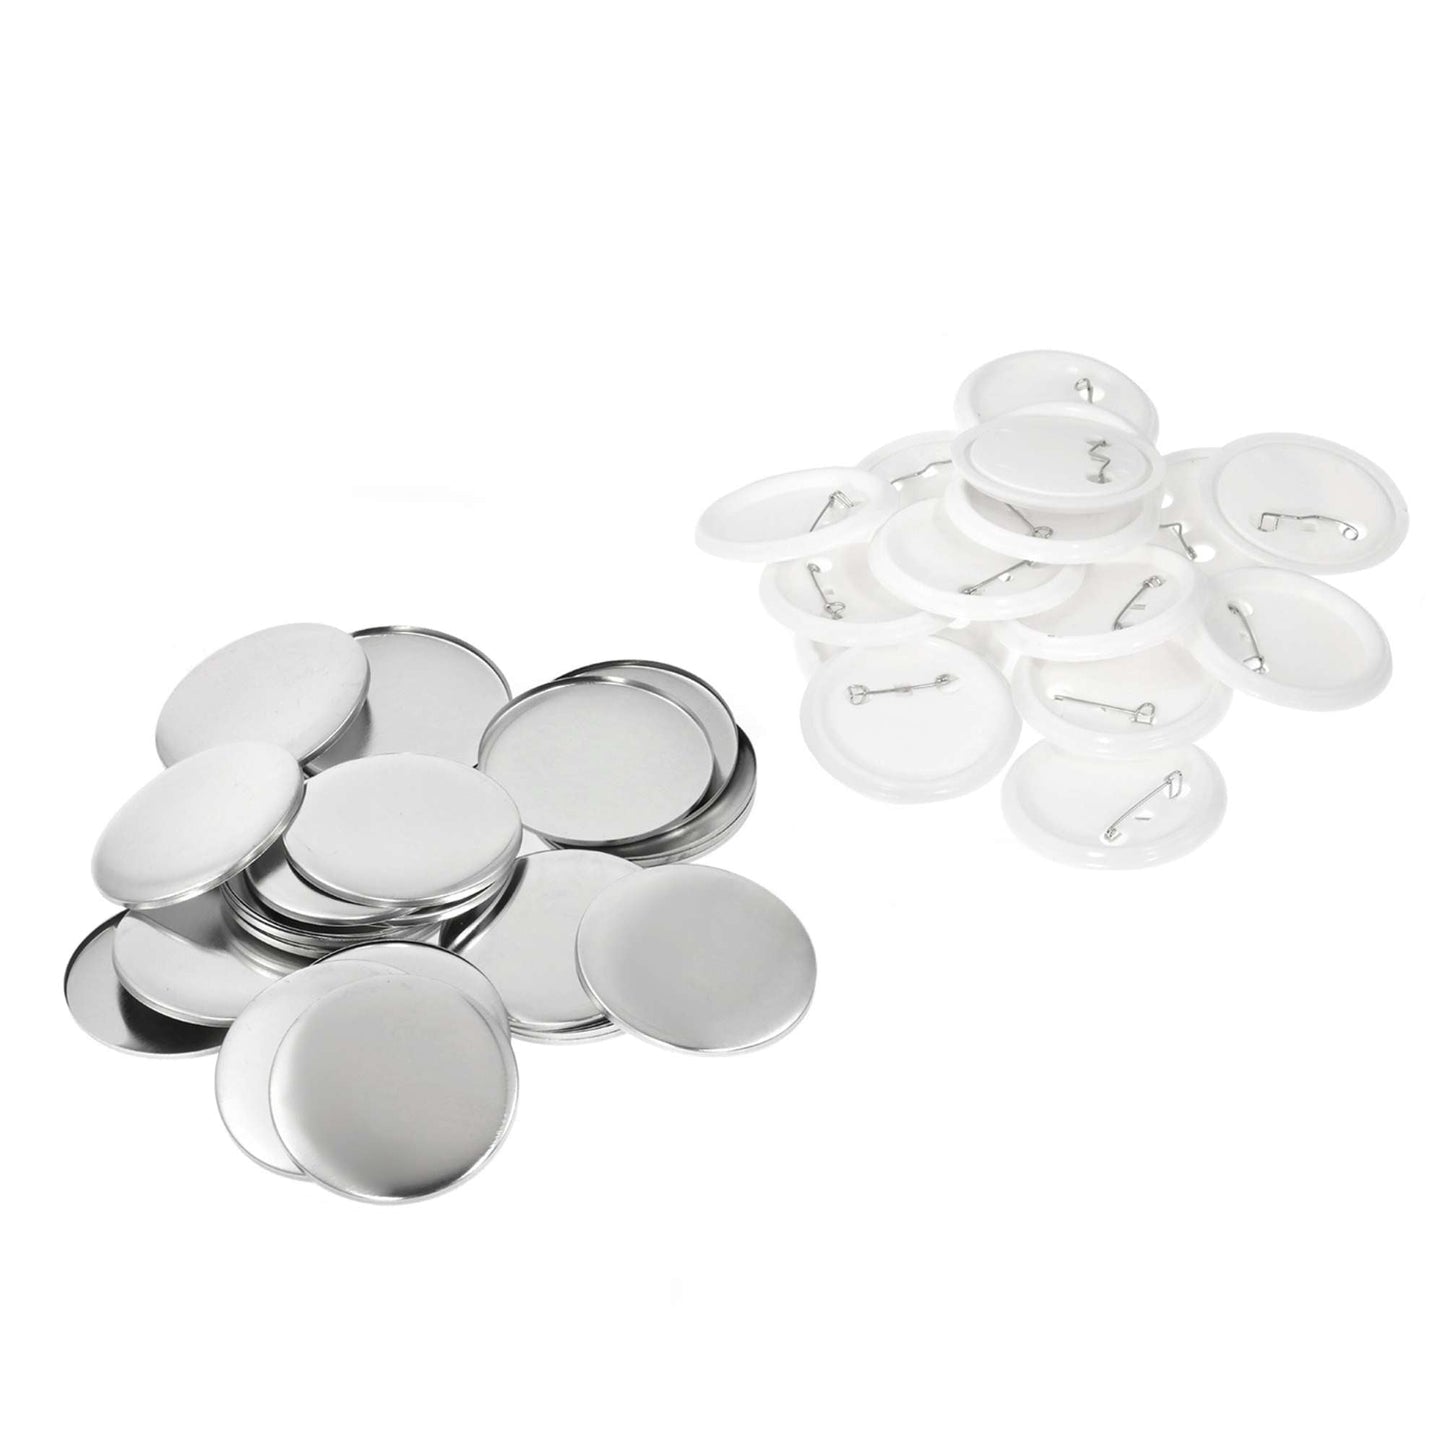 500x Button Badges 25mm - Craft DIY Hobby Accessory Making